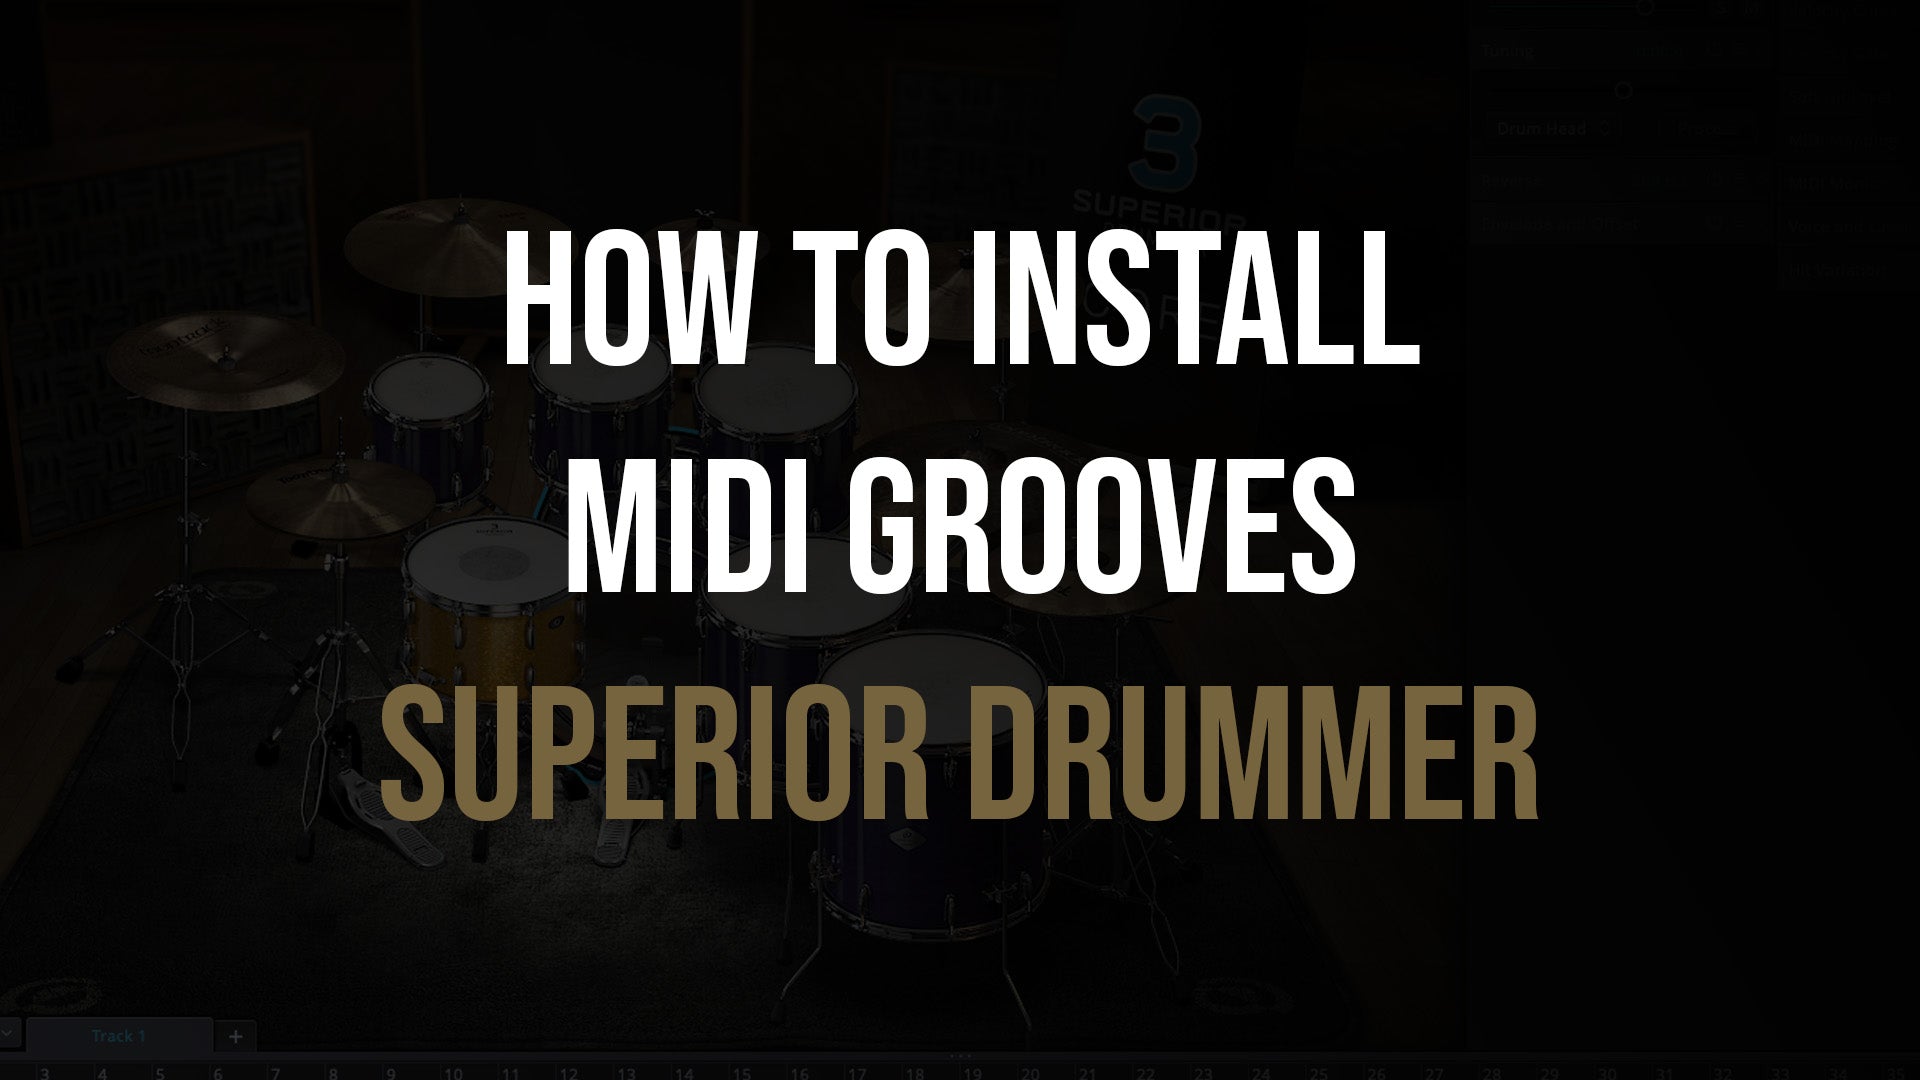 How to Install Loudstakk MIDI Grooves into Superior Drummer